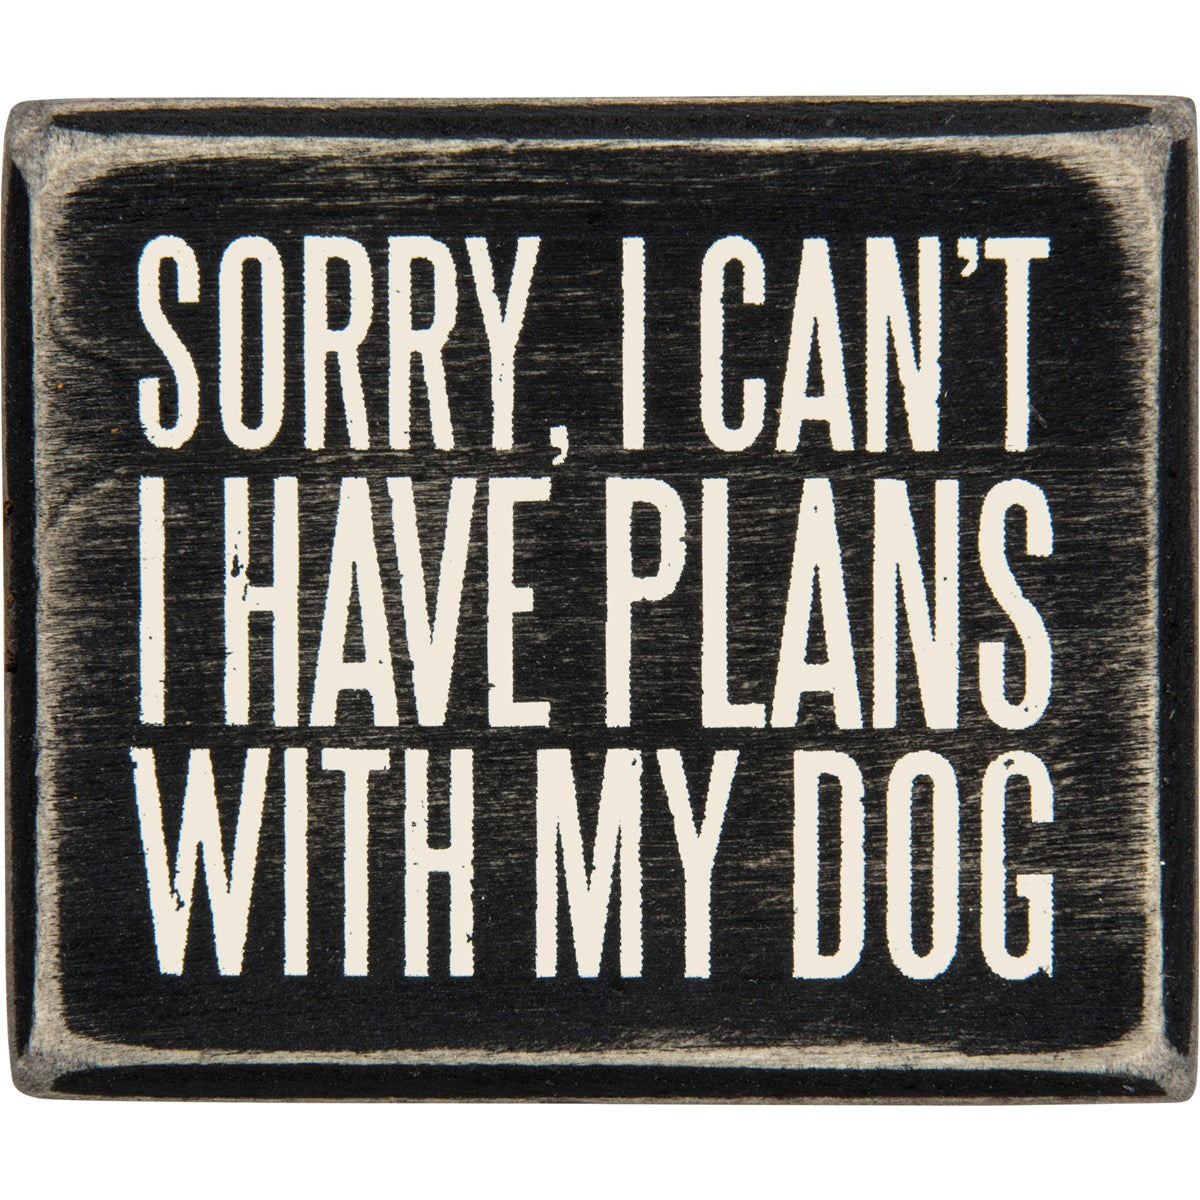 Sorry I Can't I Have Plans With My Dog Mini Wood Box Sign